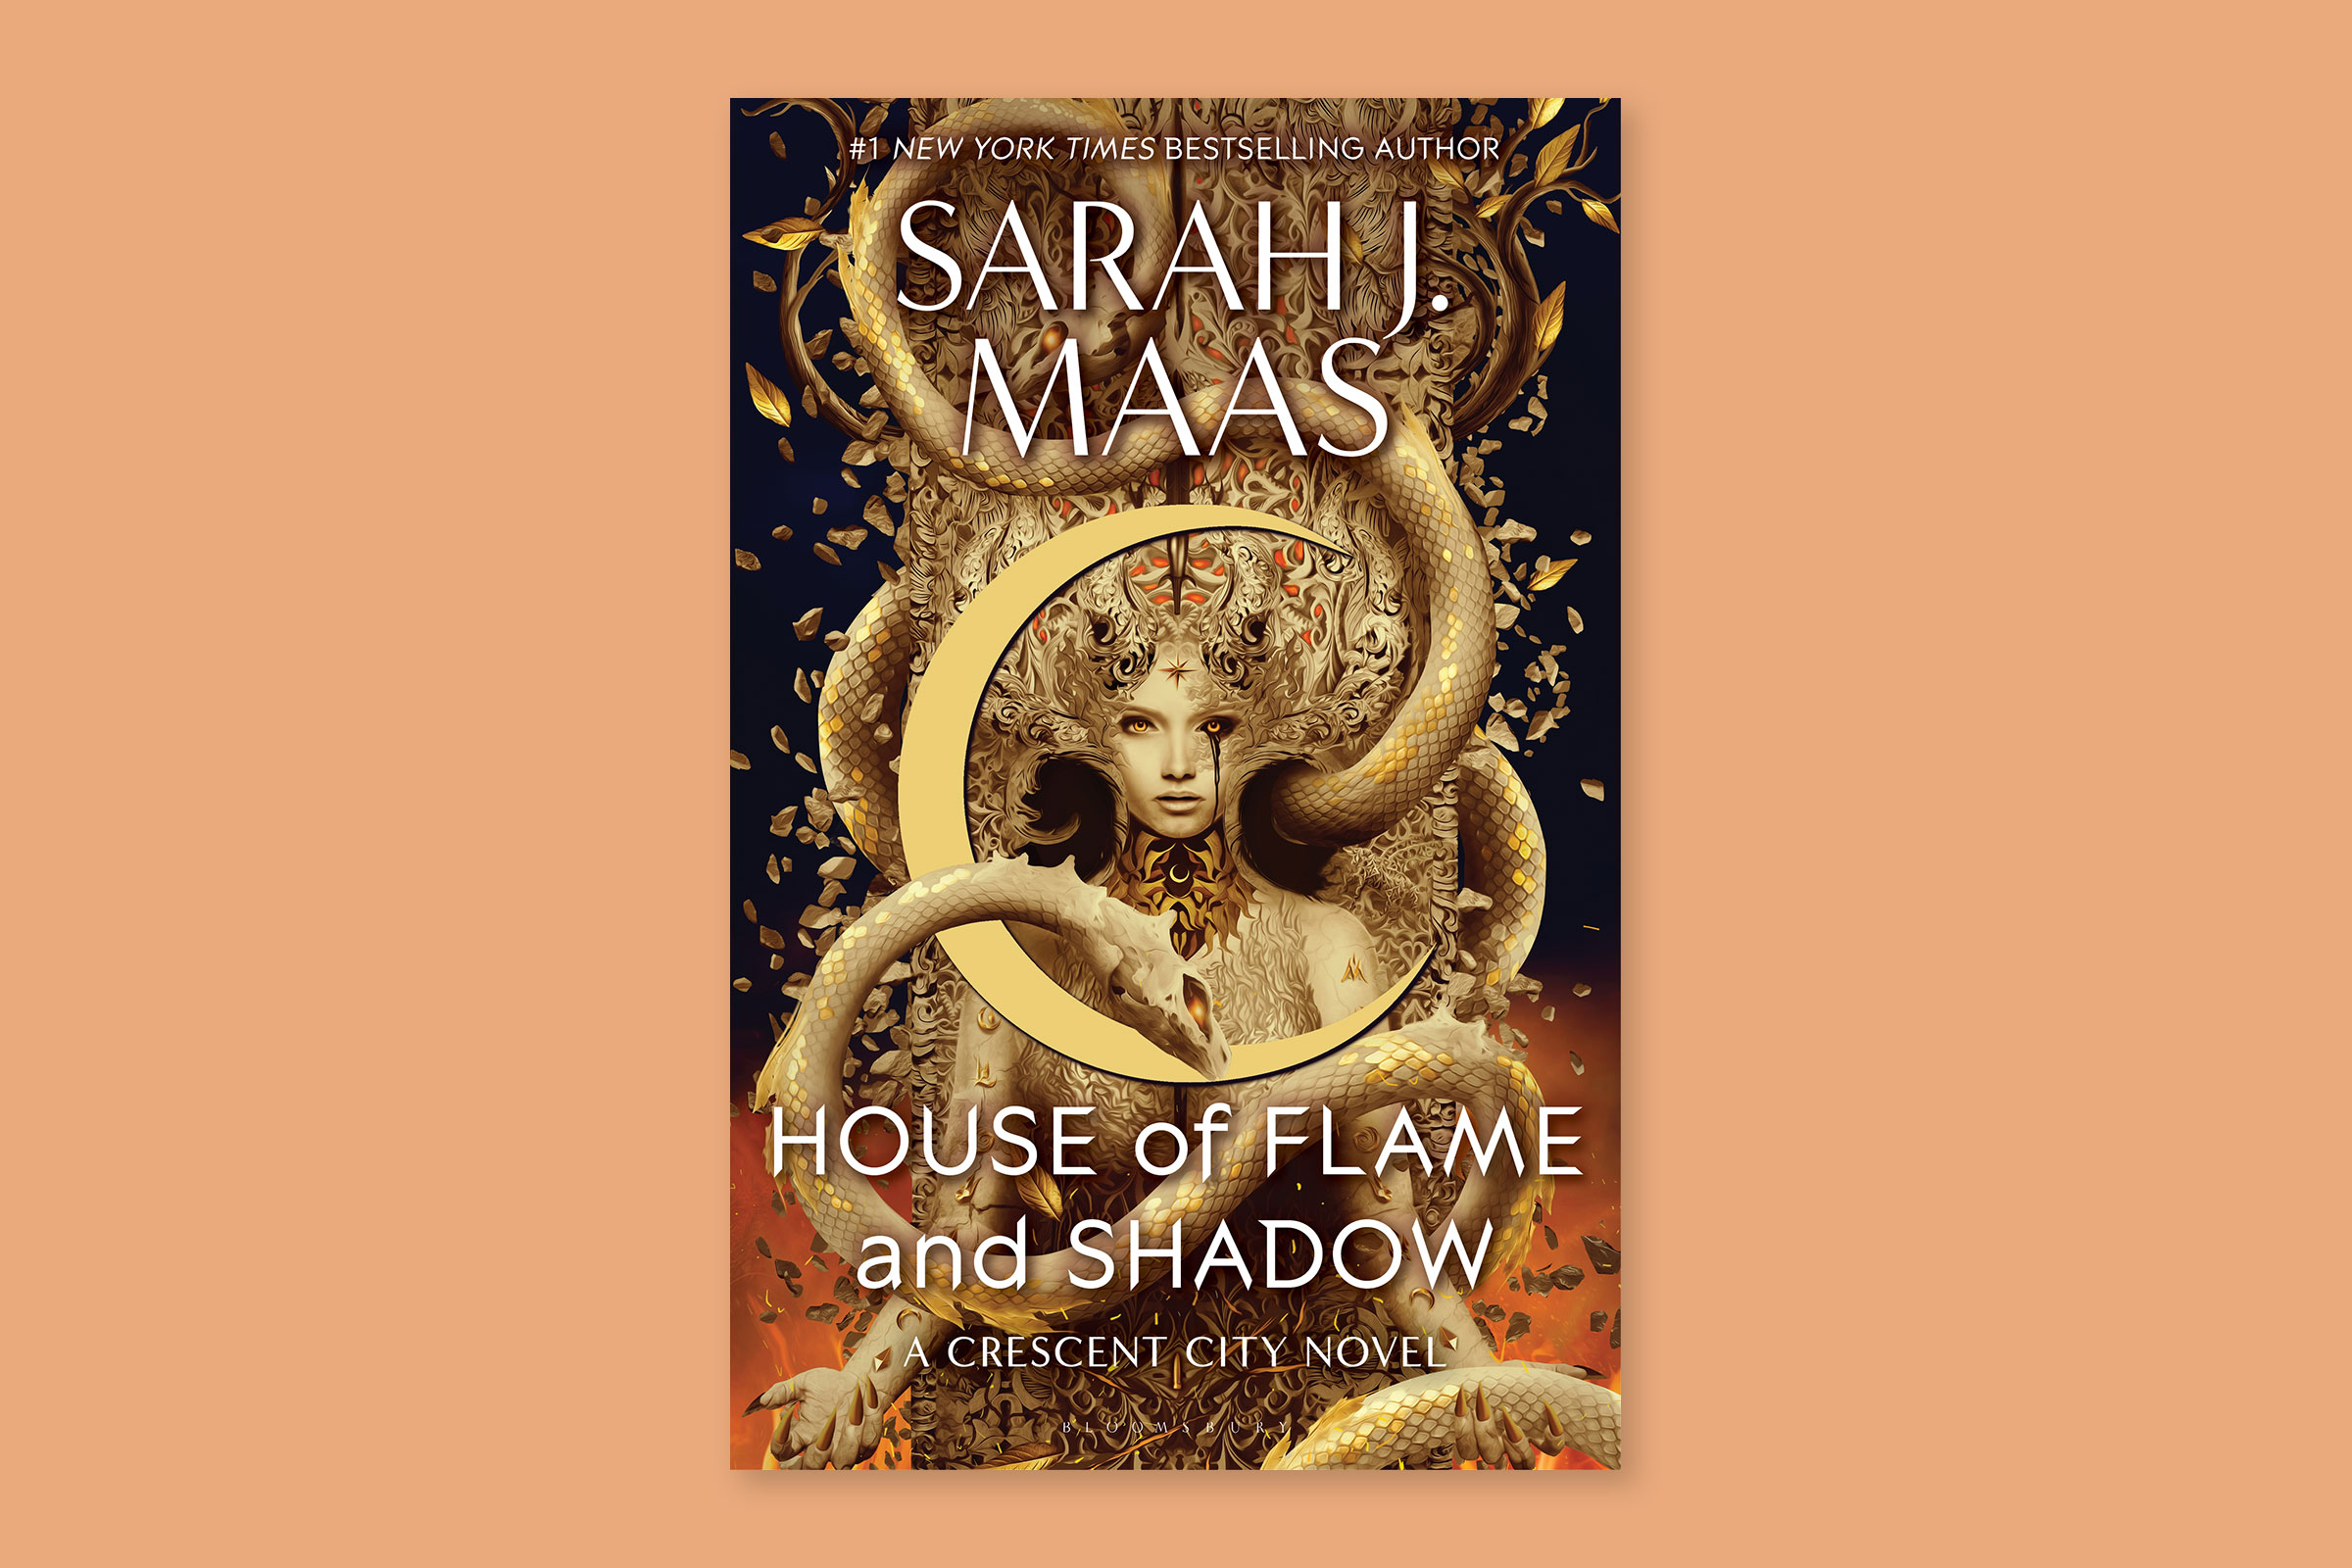 'House of Flame and Shadow' by Sarah J. Maas